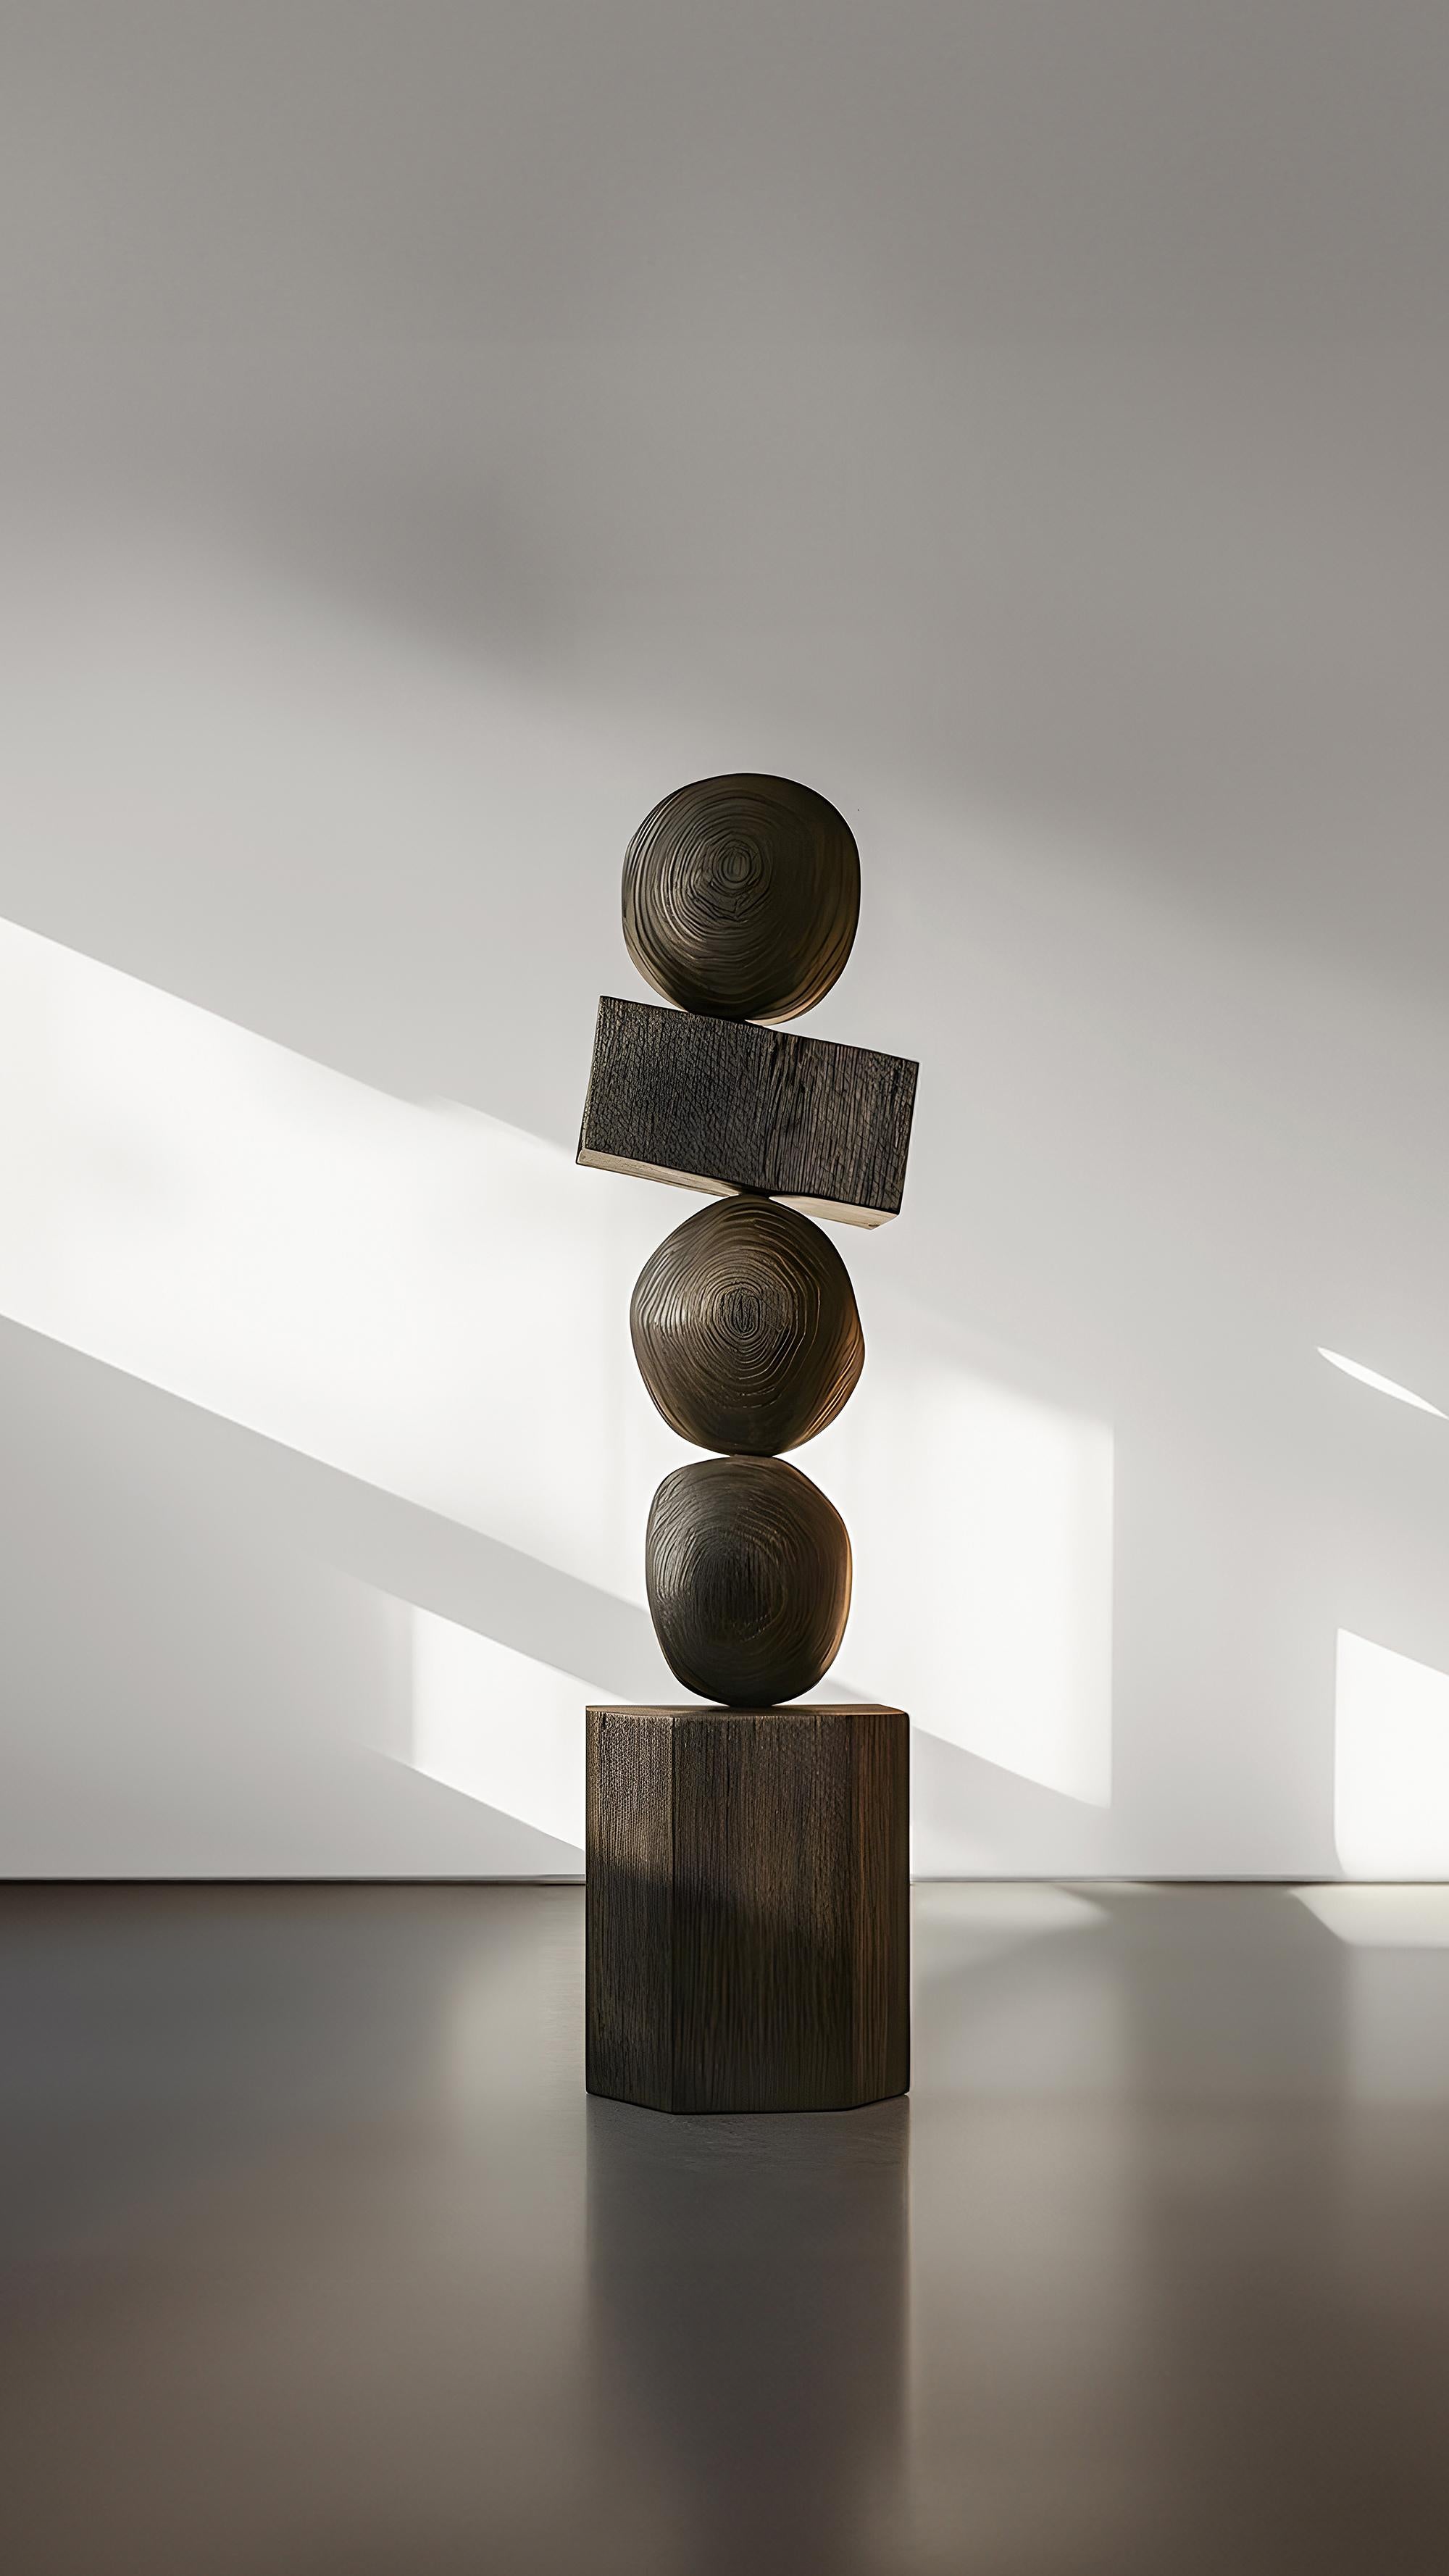 Mexican Sleek and Dark, Joel Escalona's Burned Oak Totem Emerges, Still Stand No92 For Sale